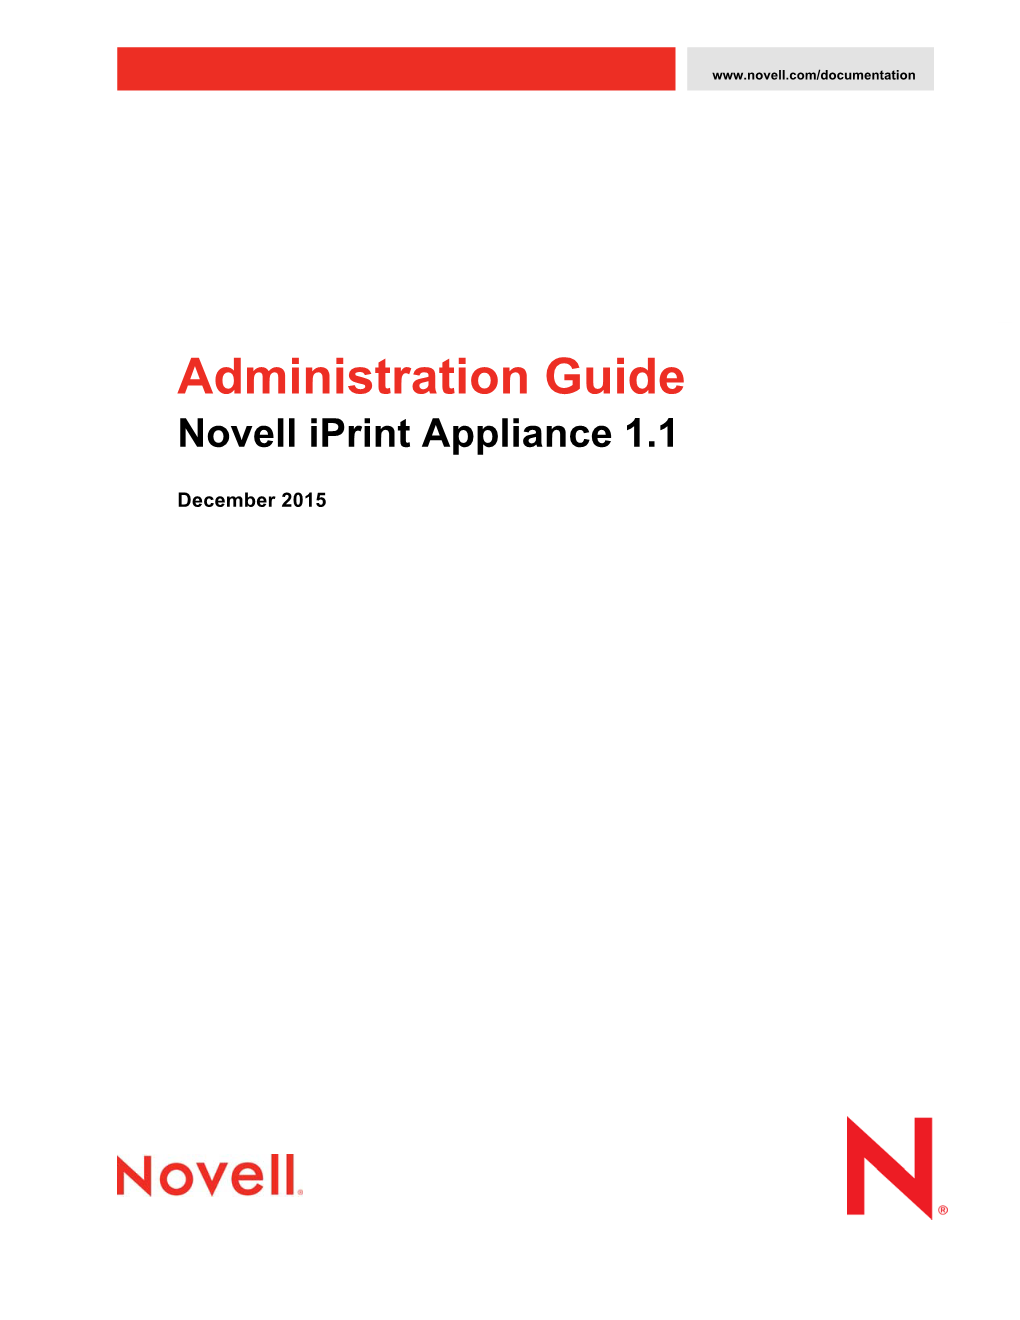 Novell Iprint Appliance 1.1 Administration Guide 7 Managing Iprint Appliance 81 7.1 Administrative Passwords